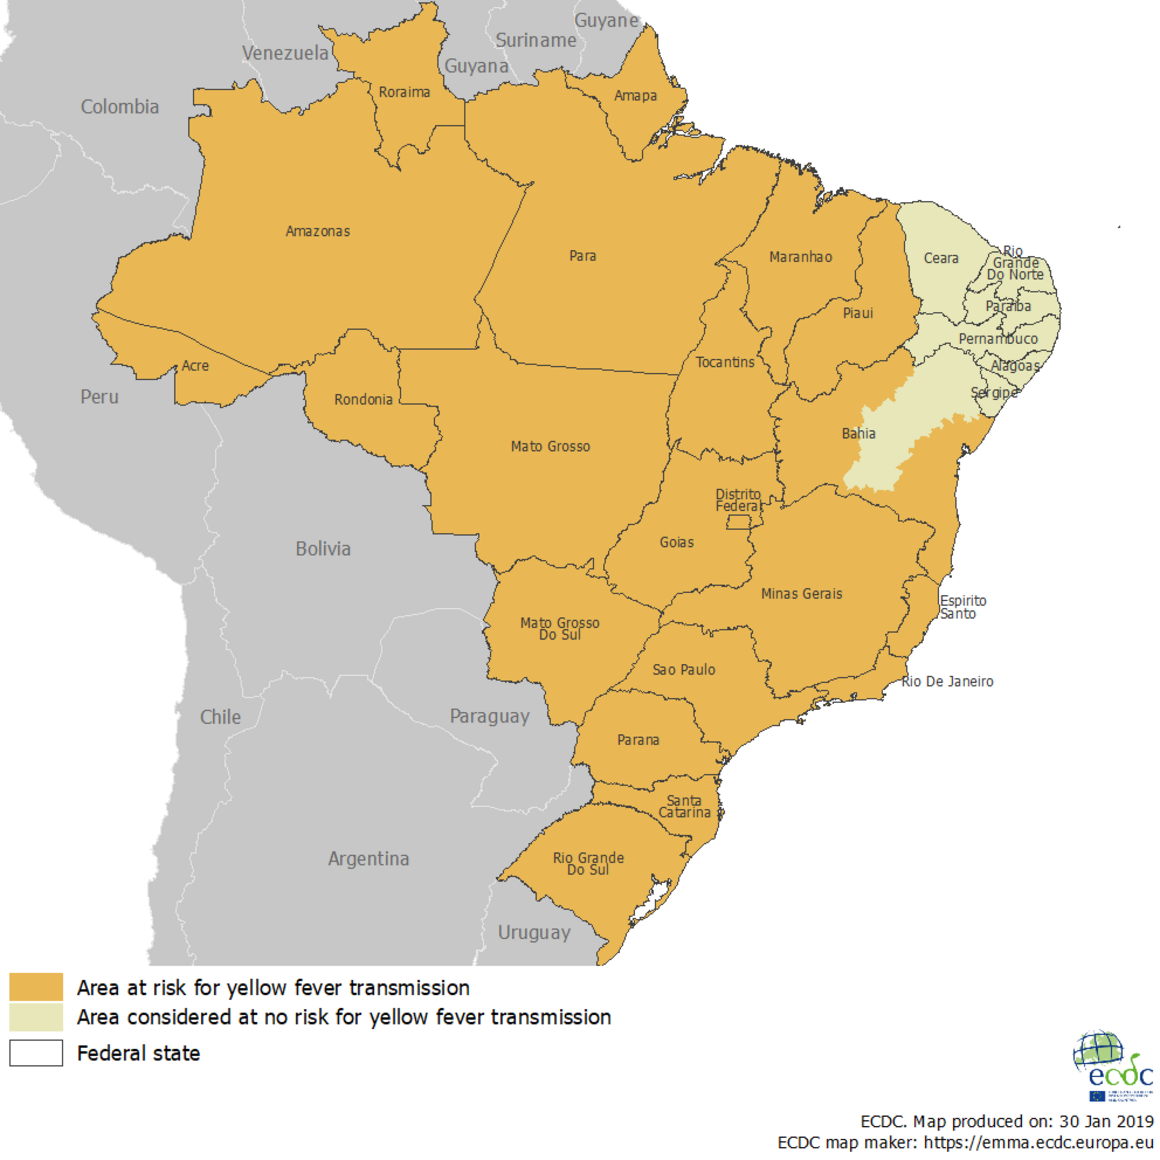 Yellow fever risk areas in Brazil, as of 30 January 2019